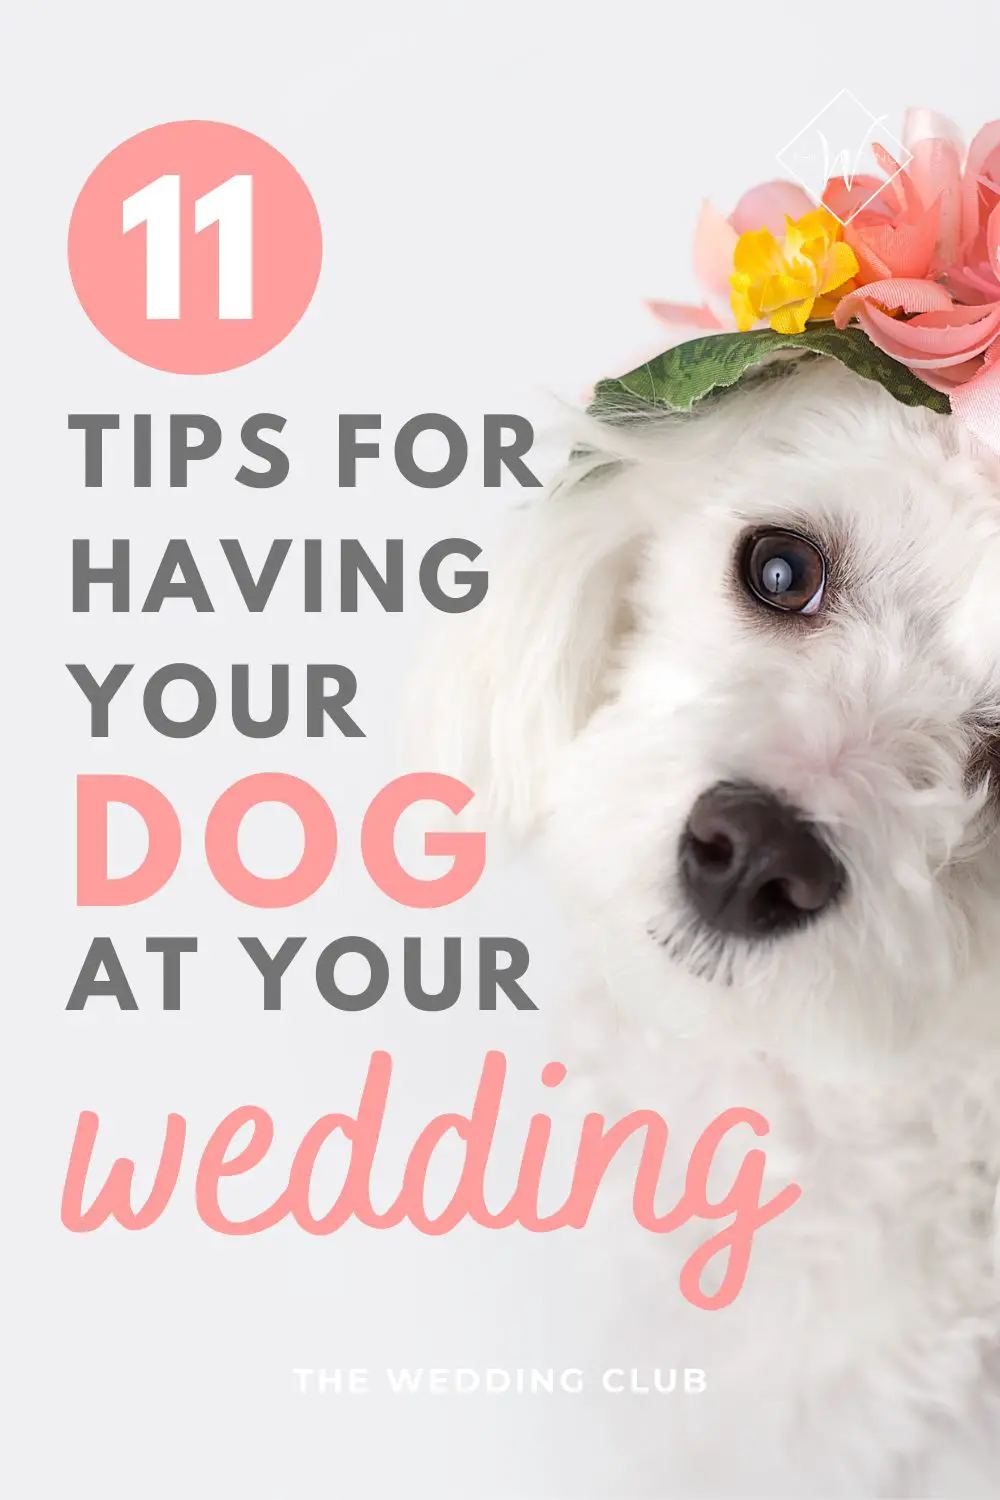 11 Tips for having your dog at your wedding